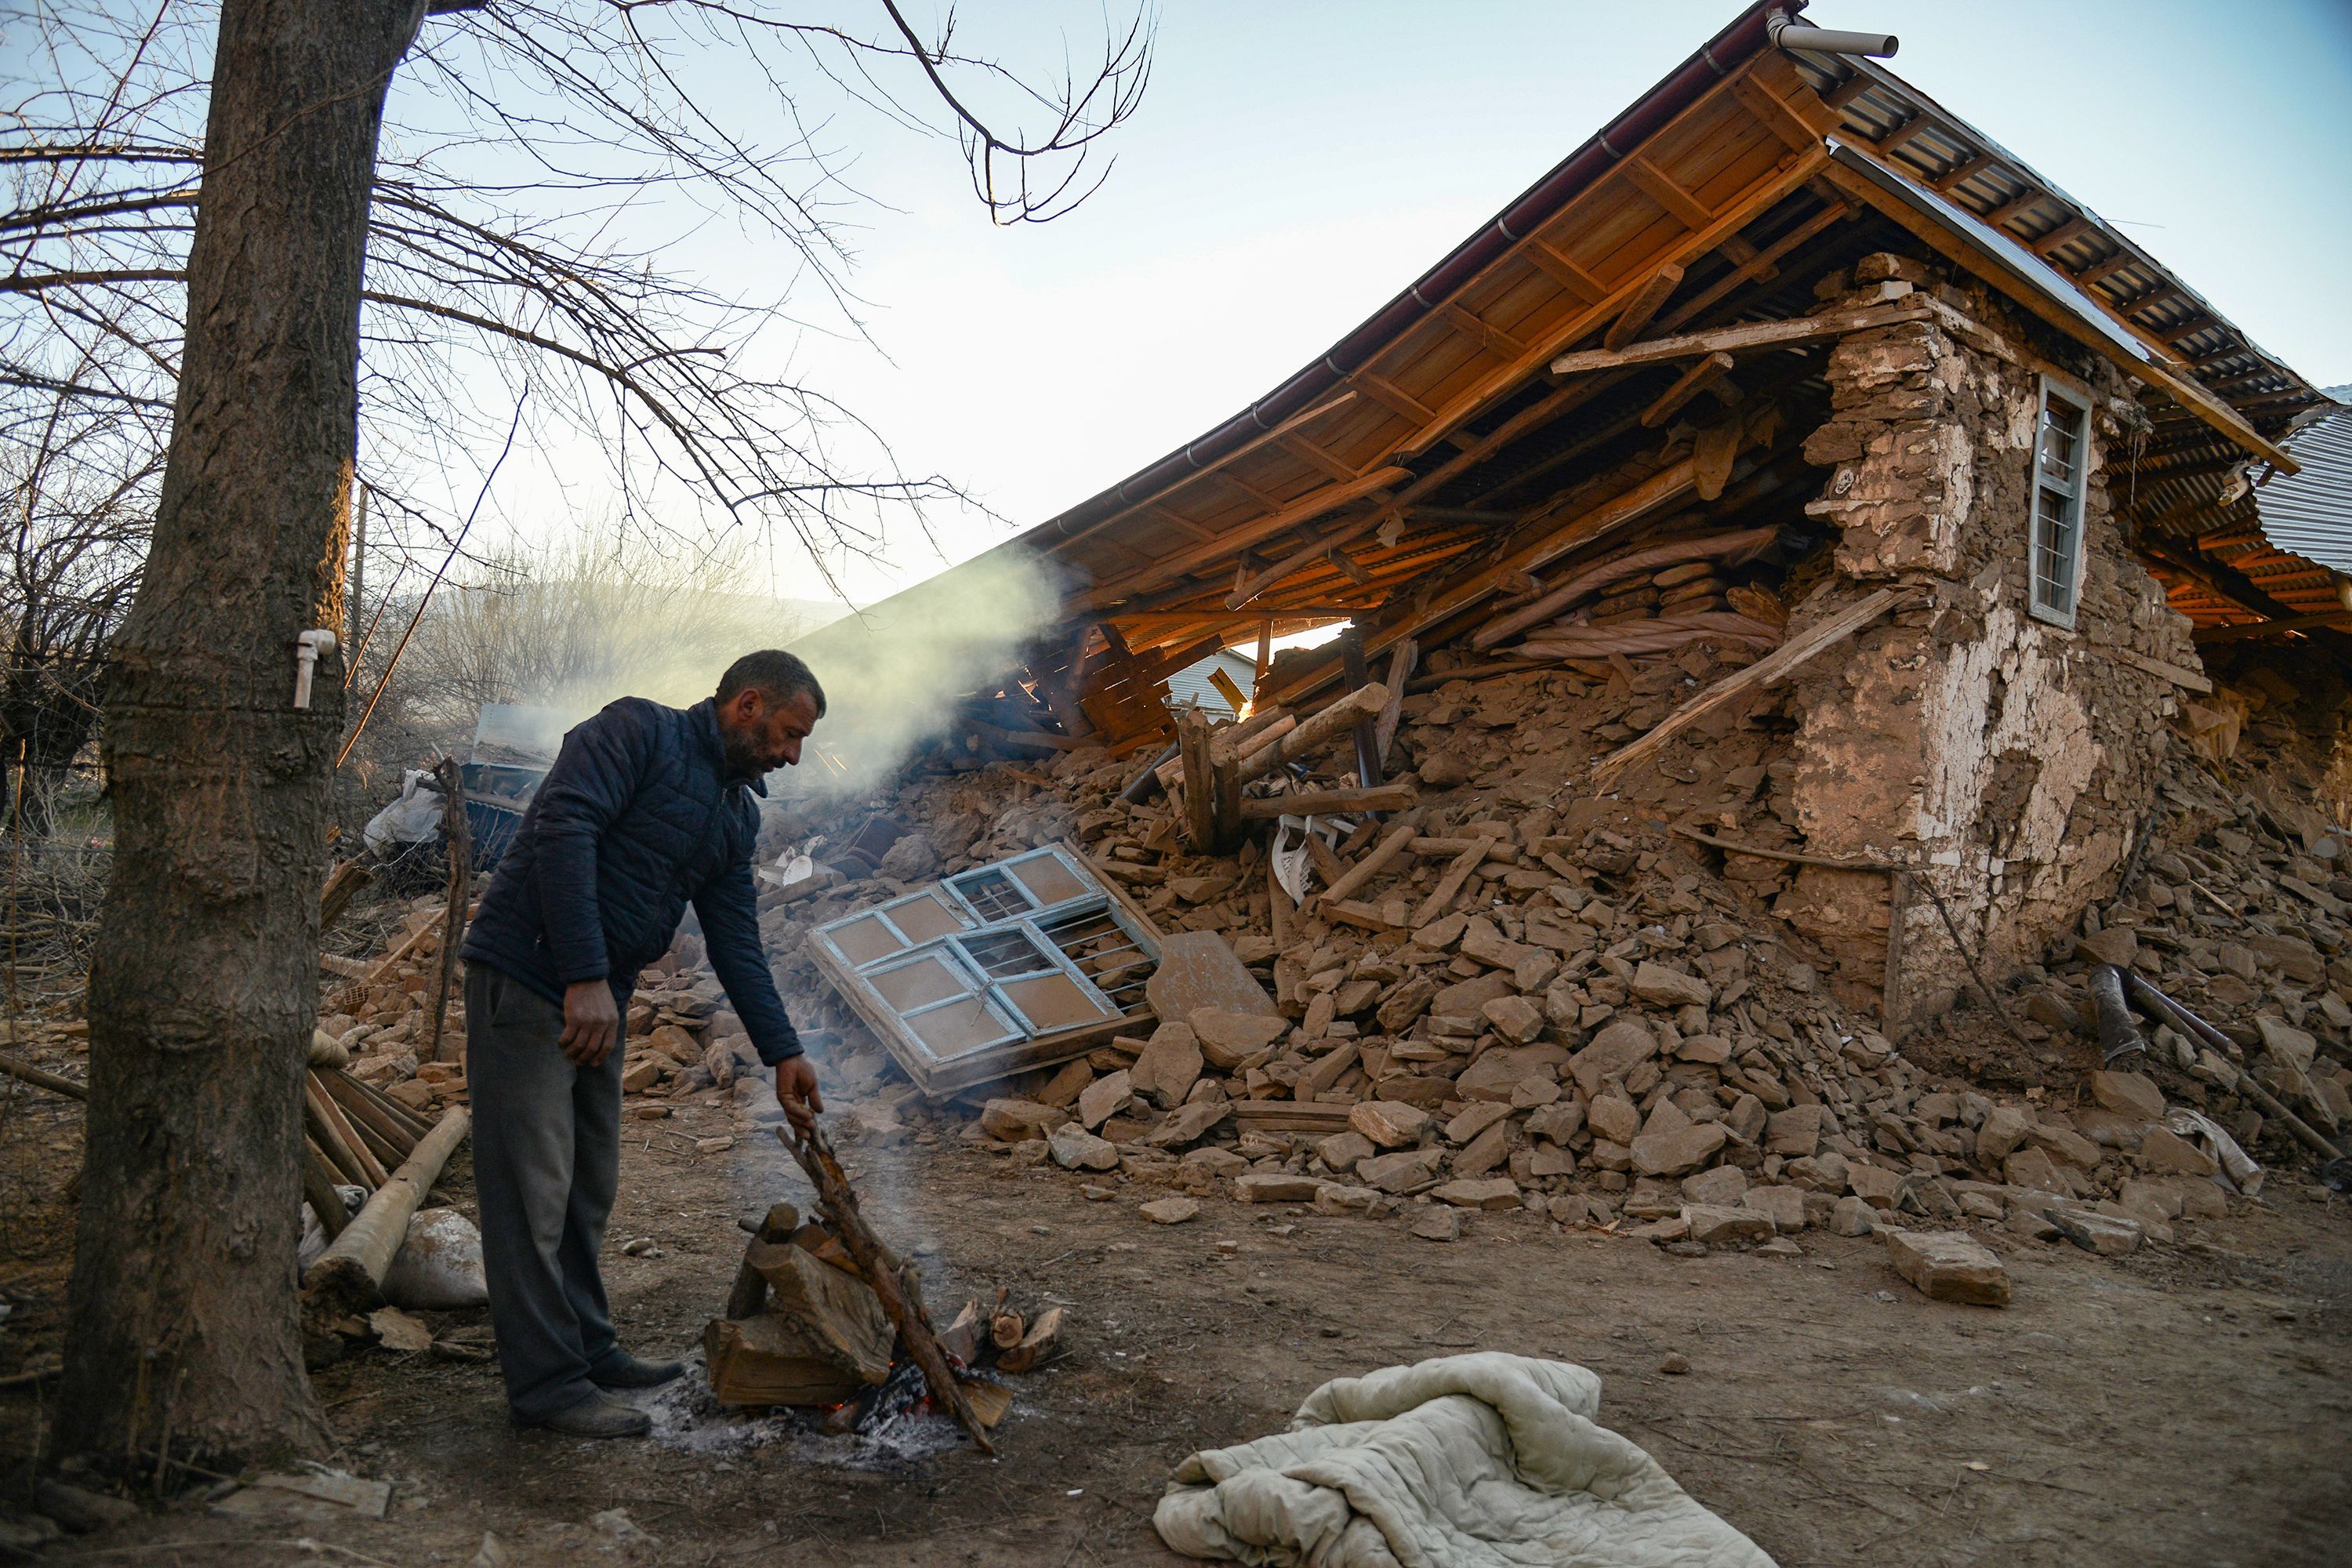 A villager stands by his collapsed house after an earthquake in Sivrice near Elazig, Eastern Turkey, 